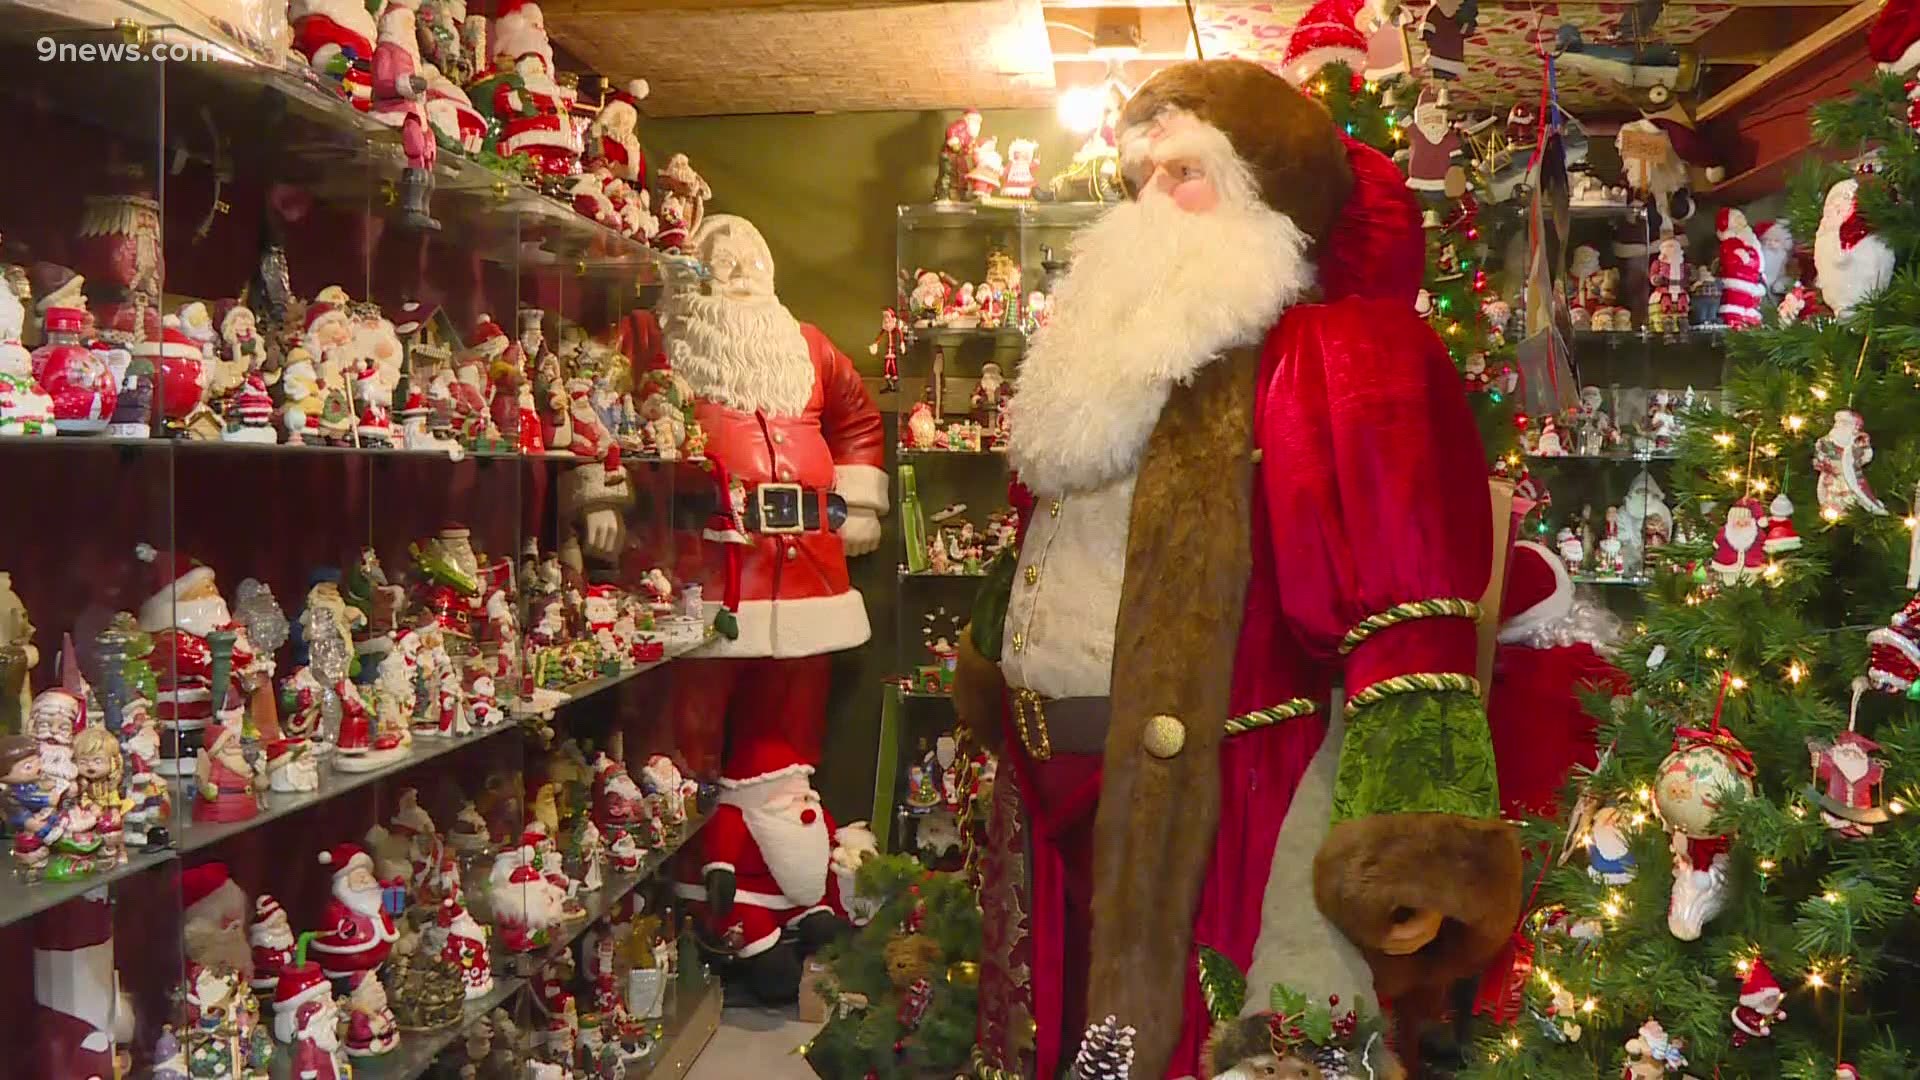 The entire 1,200 square foot basement is filled from floor to ceiling with thousands of figurines of old Saint Nick.